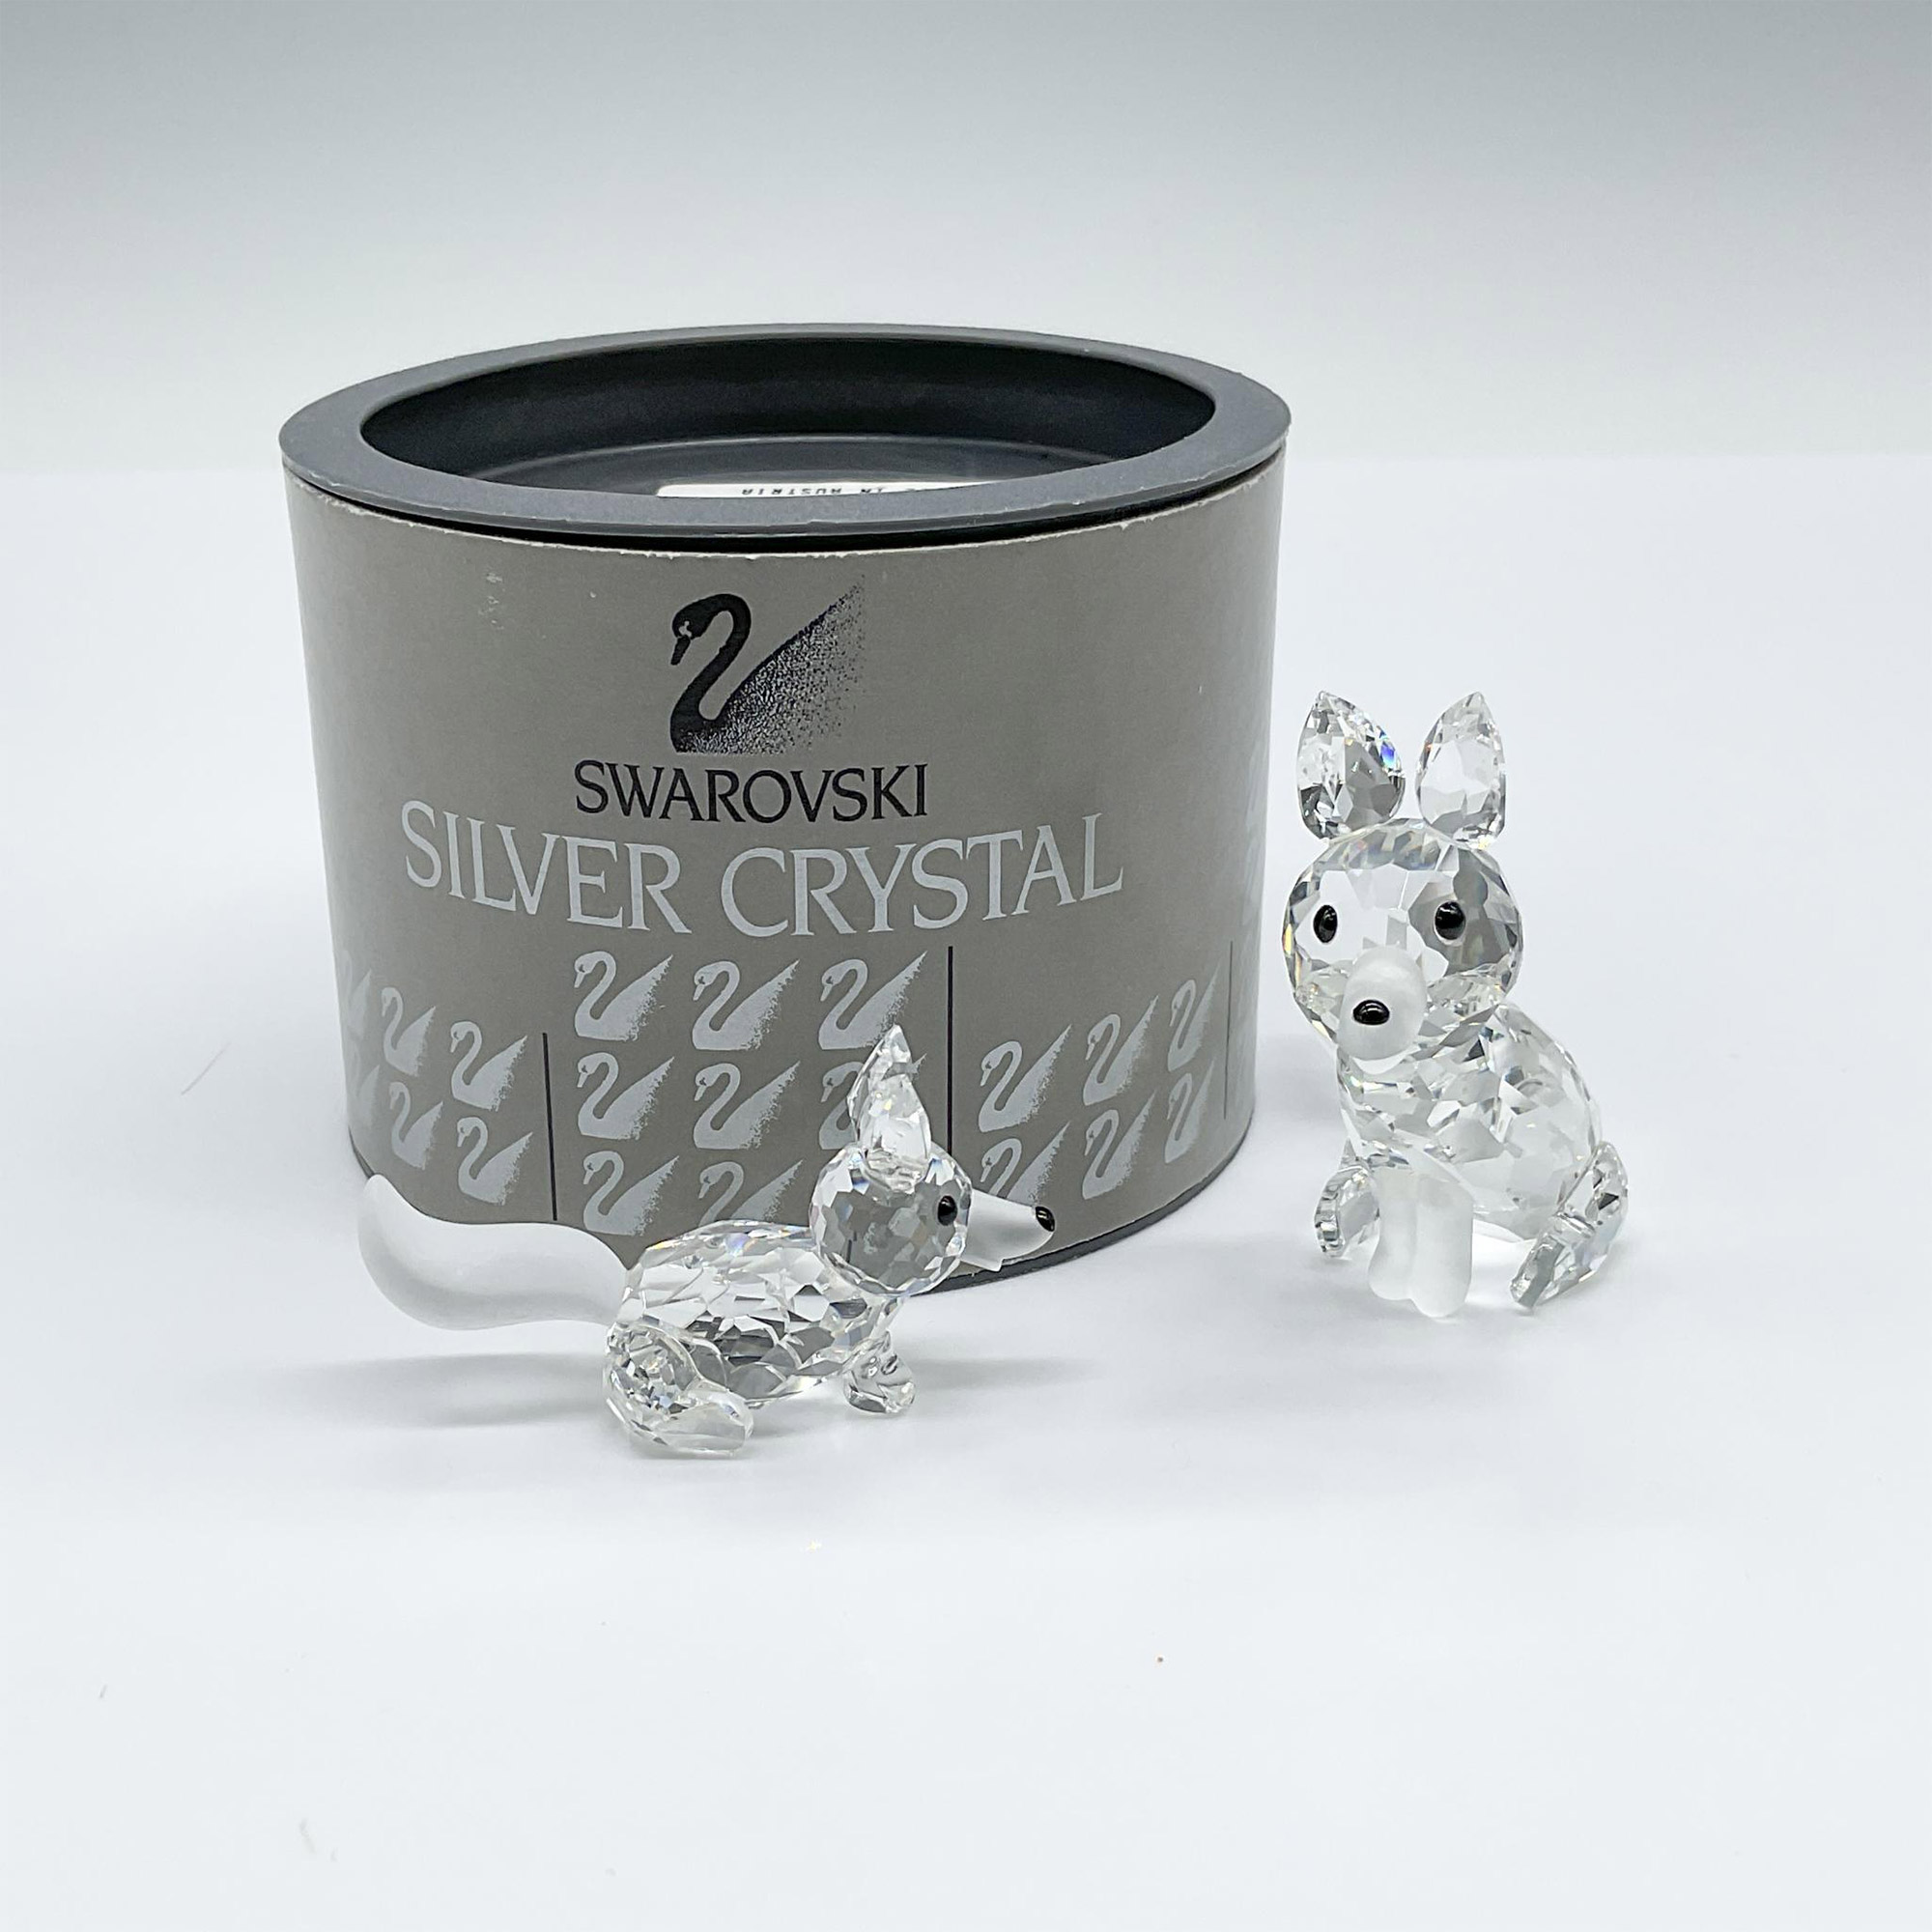 2pc Swarovski Silver Crystal Figurines, Foxes - Image 4 of 4